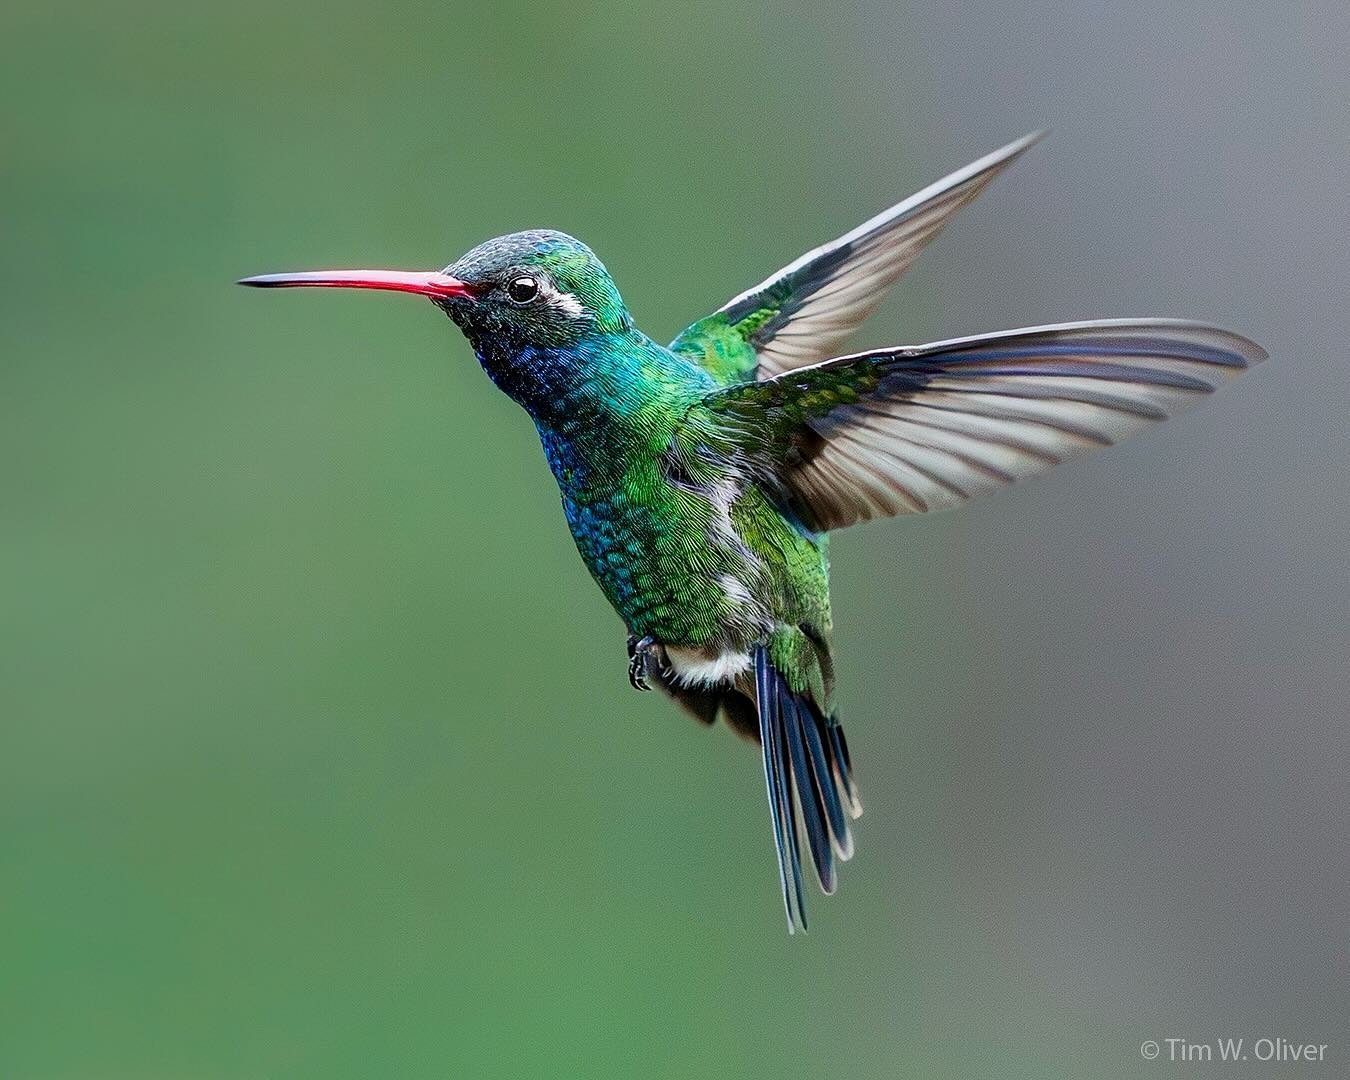 Broad-billed hummingbird hovering.  Captured with the OM System OM-1 Mark II and Olympus M.Zuiko ED 40-150mm f2.8 PRO lens @ 150mm (full-frame equivalent = 300mm).
.
@omsystem.cameras
.
#hummingbird #hummingbirds #hummingbirdsofinstagram #wildlifepho